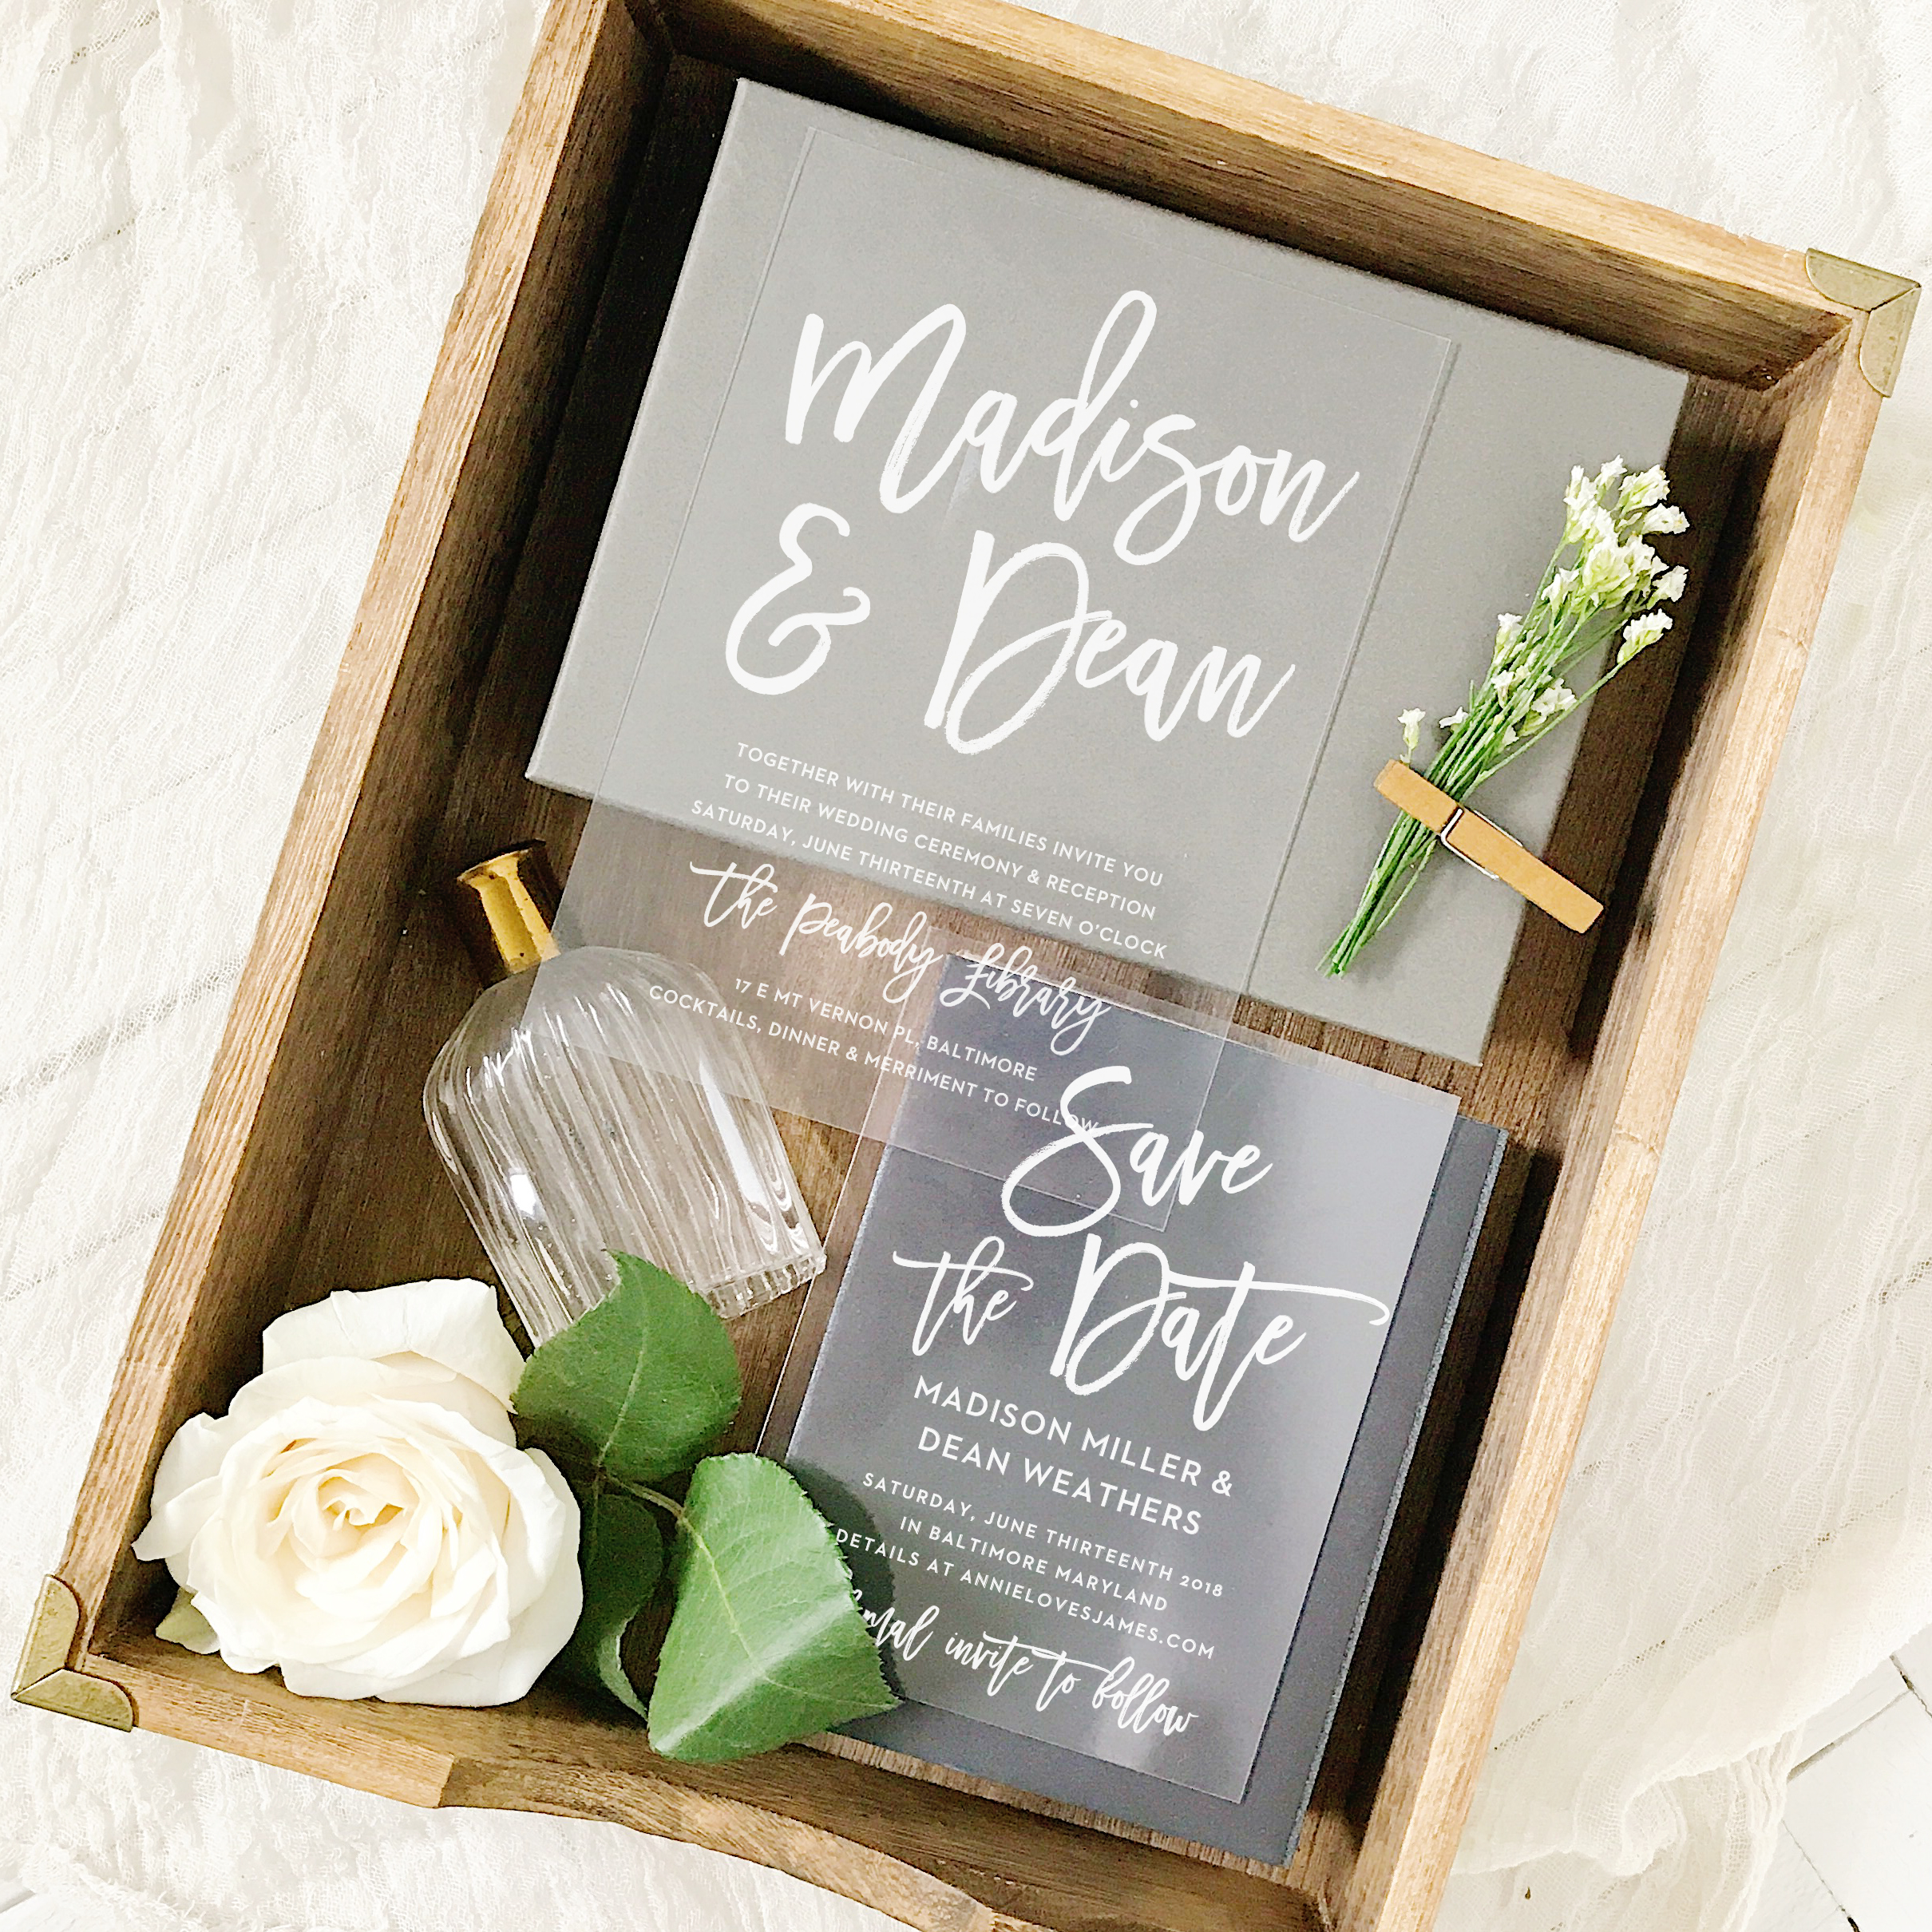 Invitation in box with flower